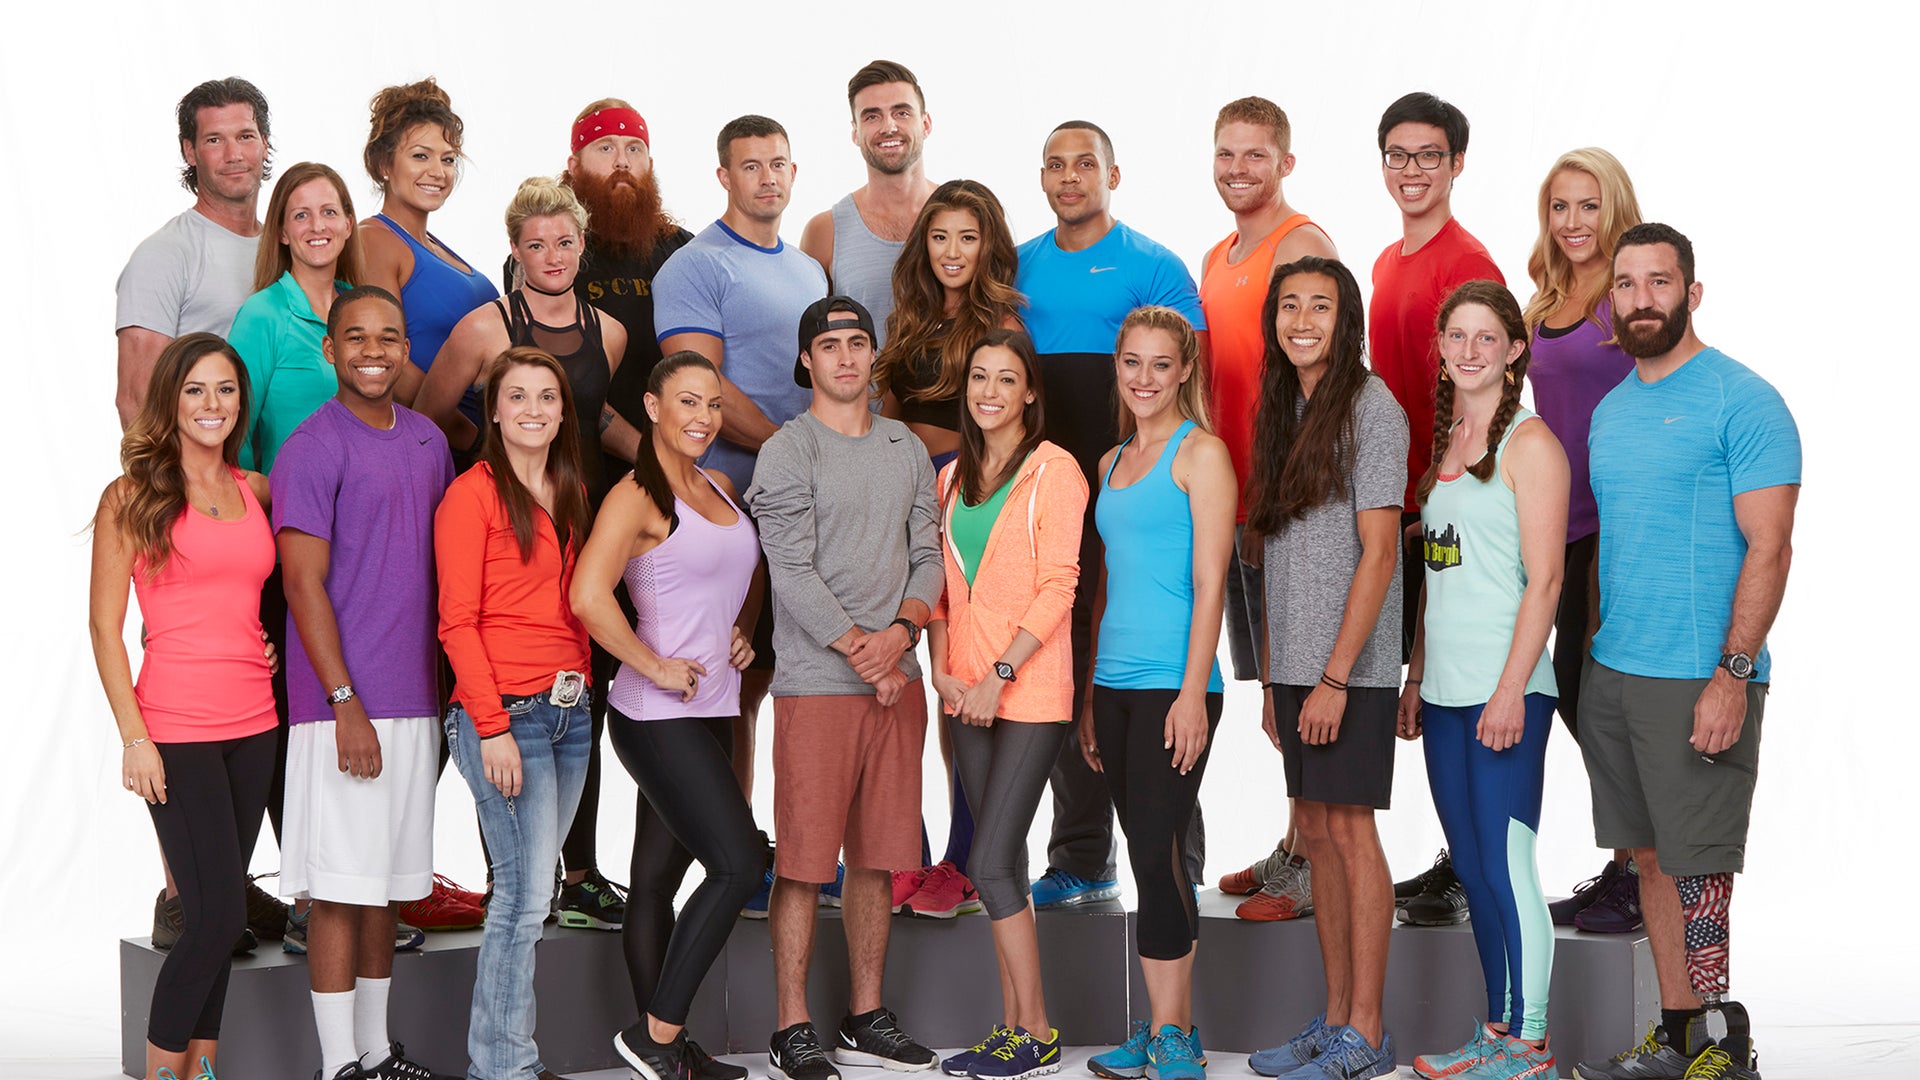 The Amazing Race 29 Meet the Cast of Complete Strangers TV Guide